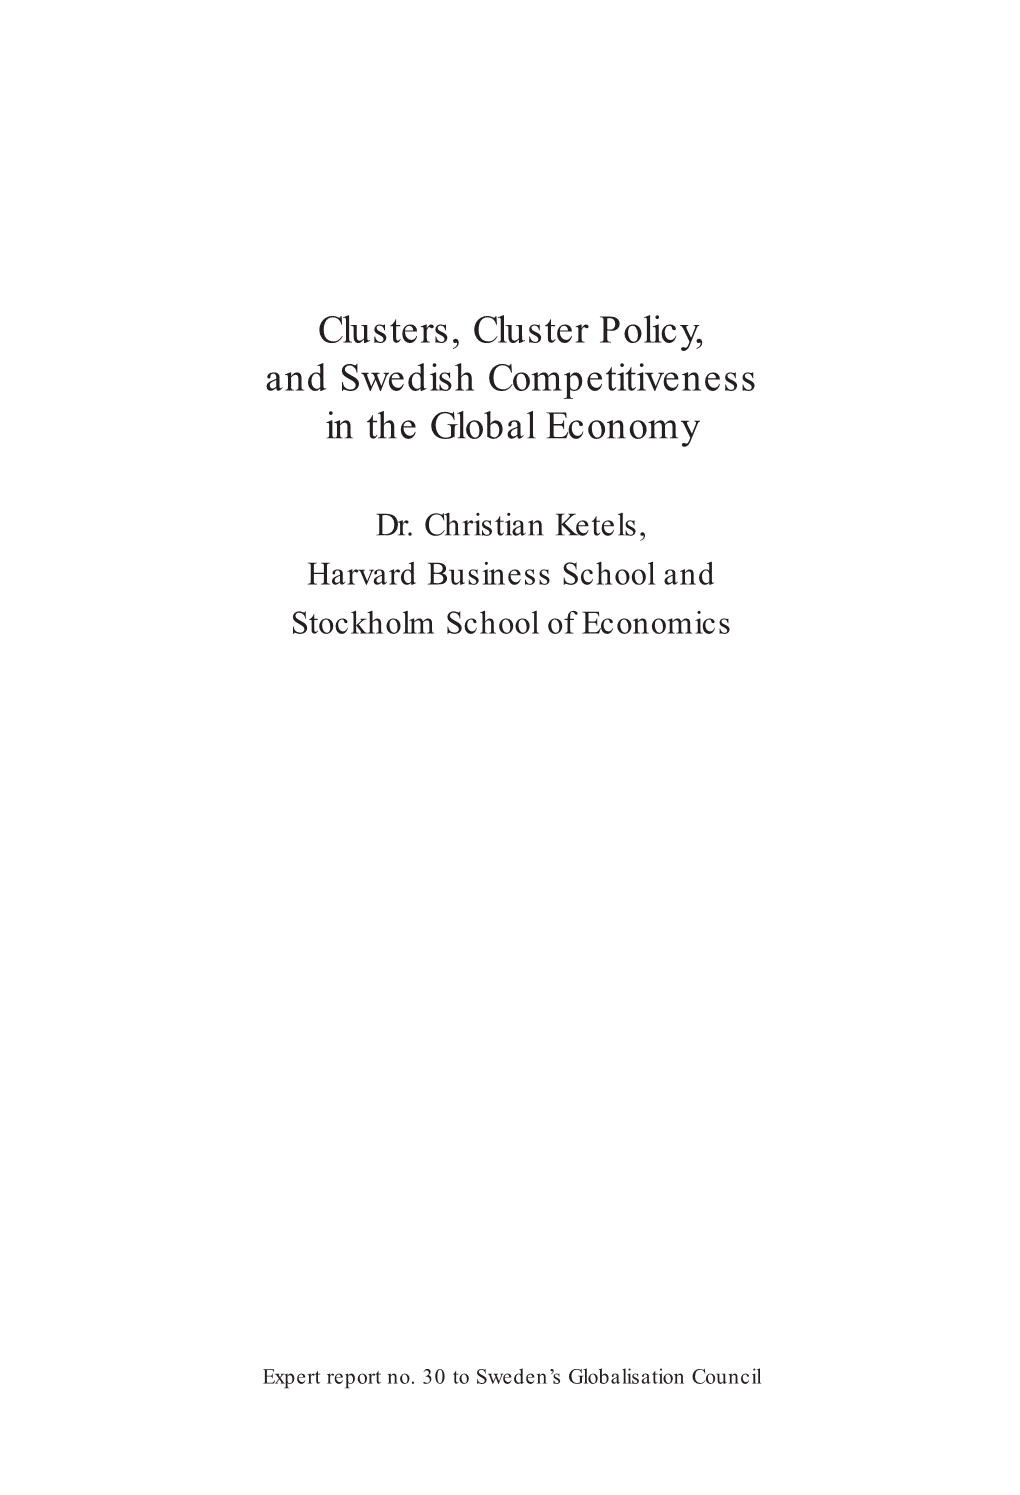 Clusters, Cluster Policy, and Swedish Competitiveness in the Global Economy